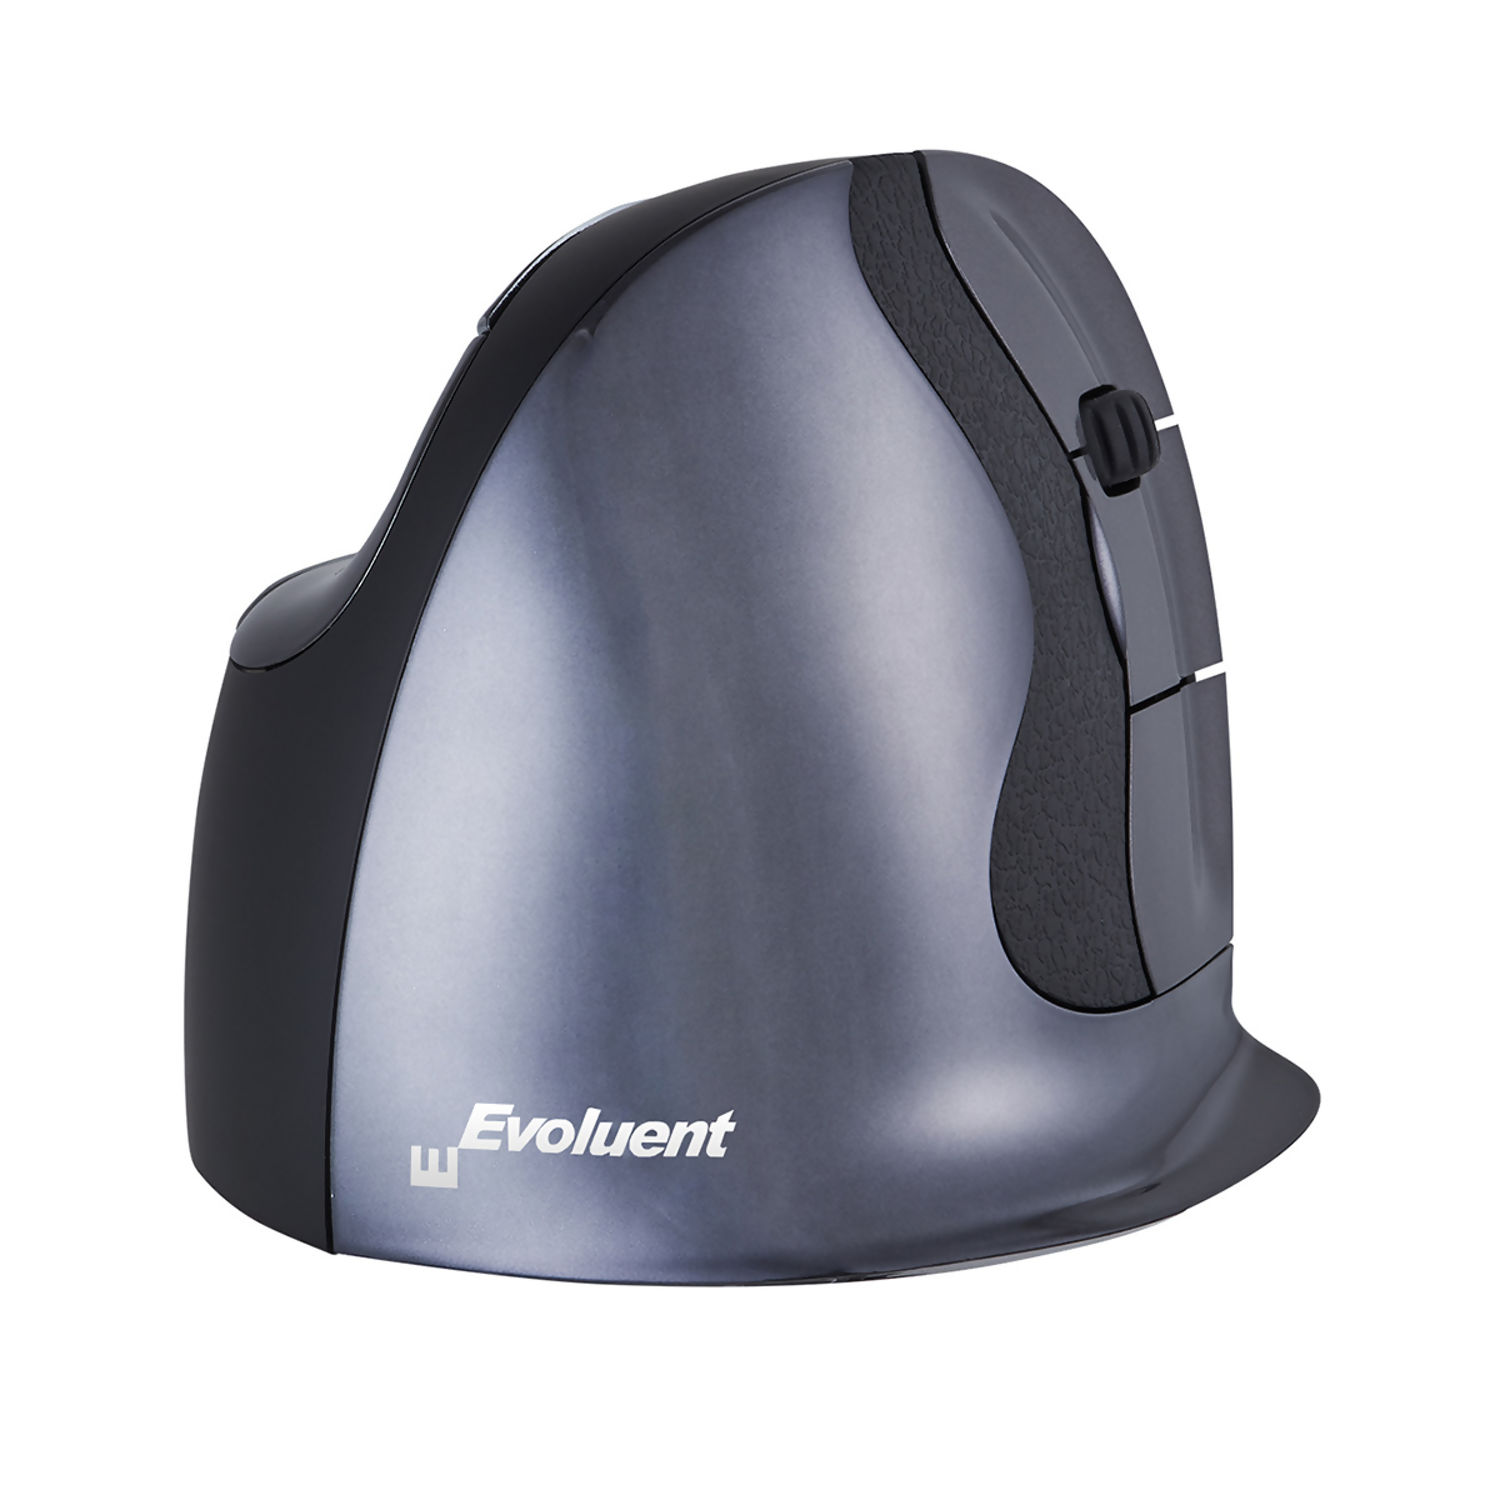 Evoluent D Vertical Mouse (Wired & Wireless)